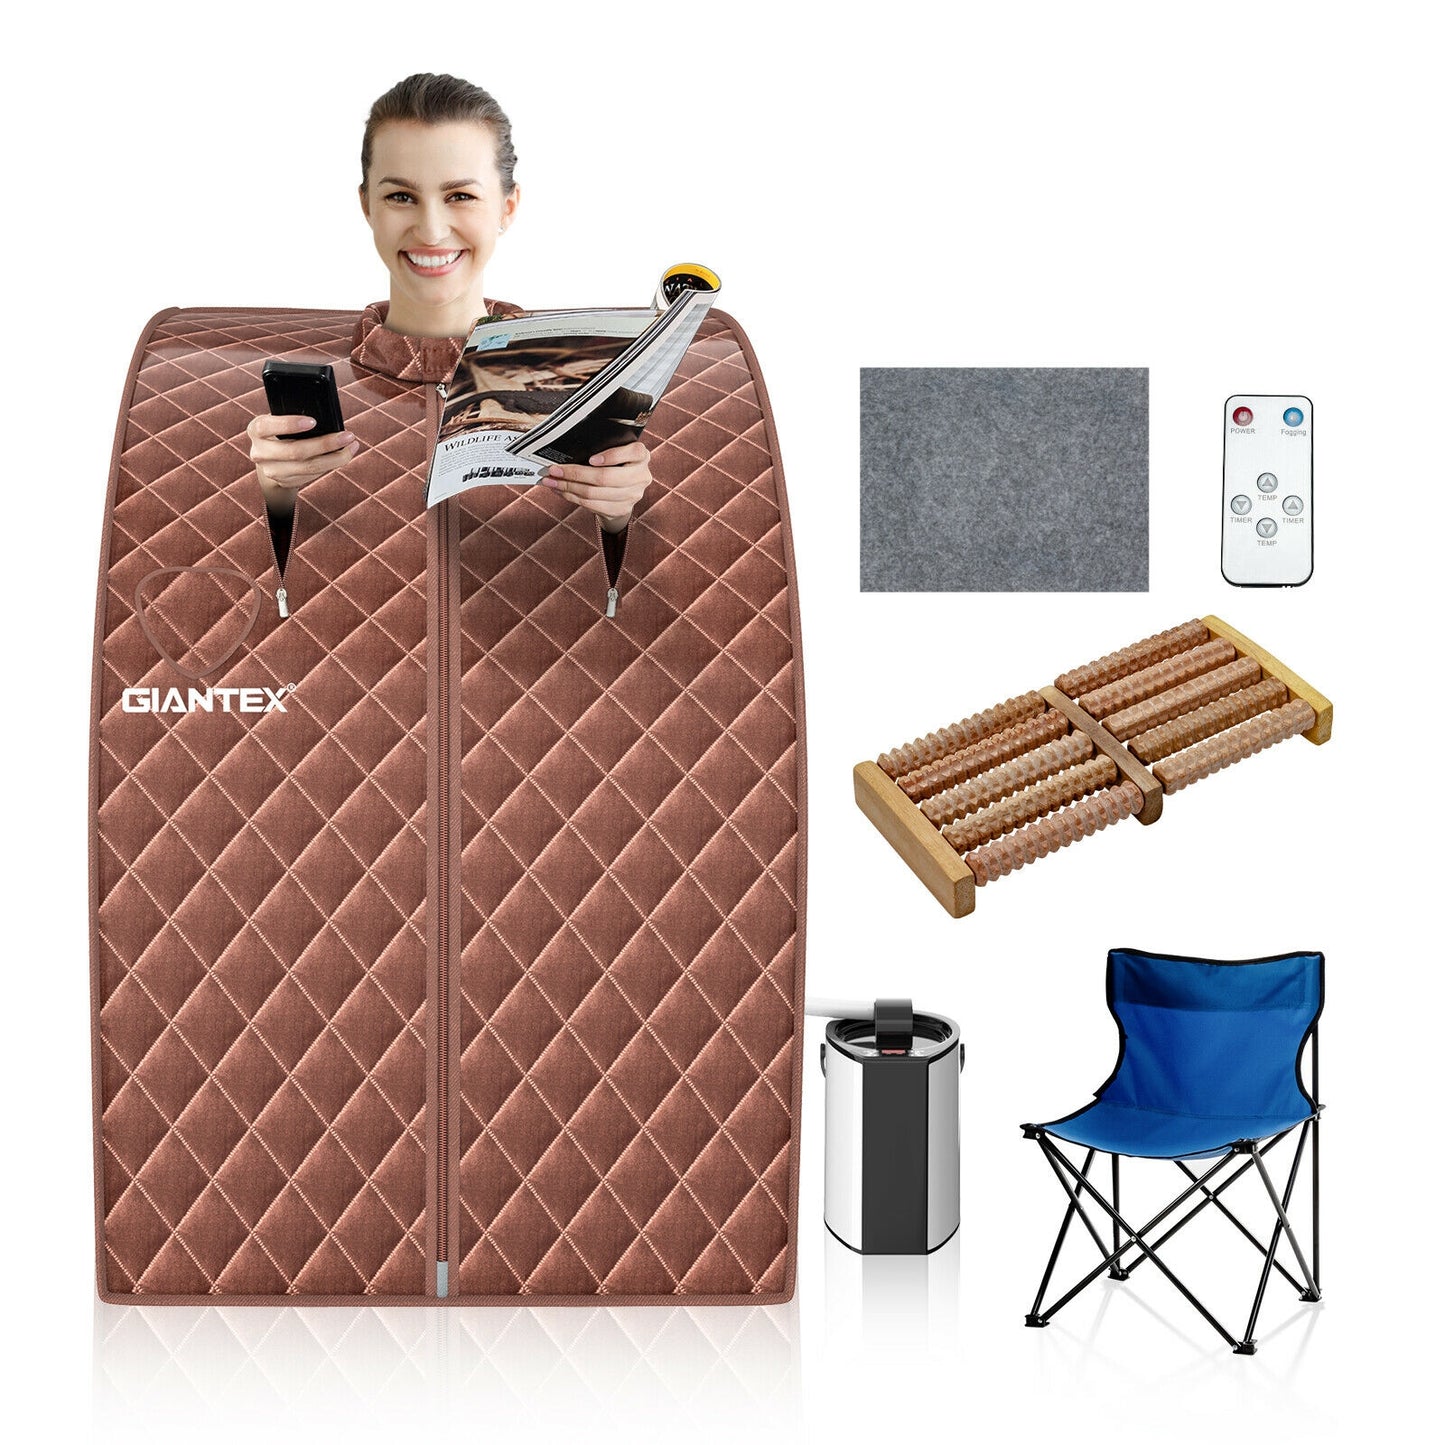 Portable Personal Steam Sauna Spa with 3L Blast-proof Steamer Chair-Coffee